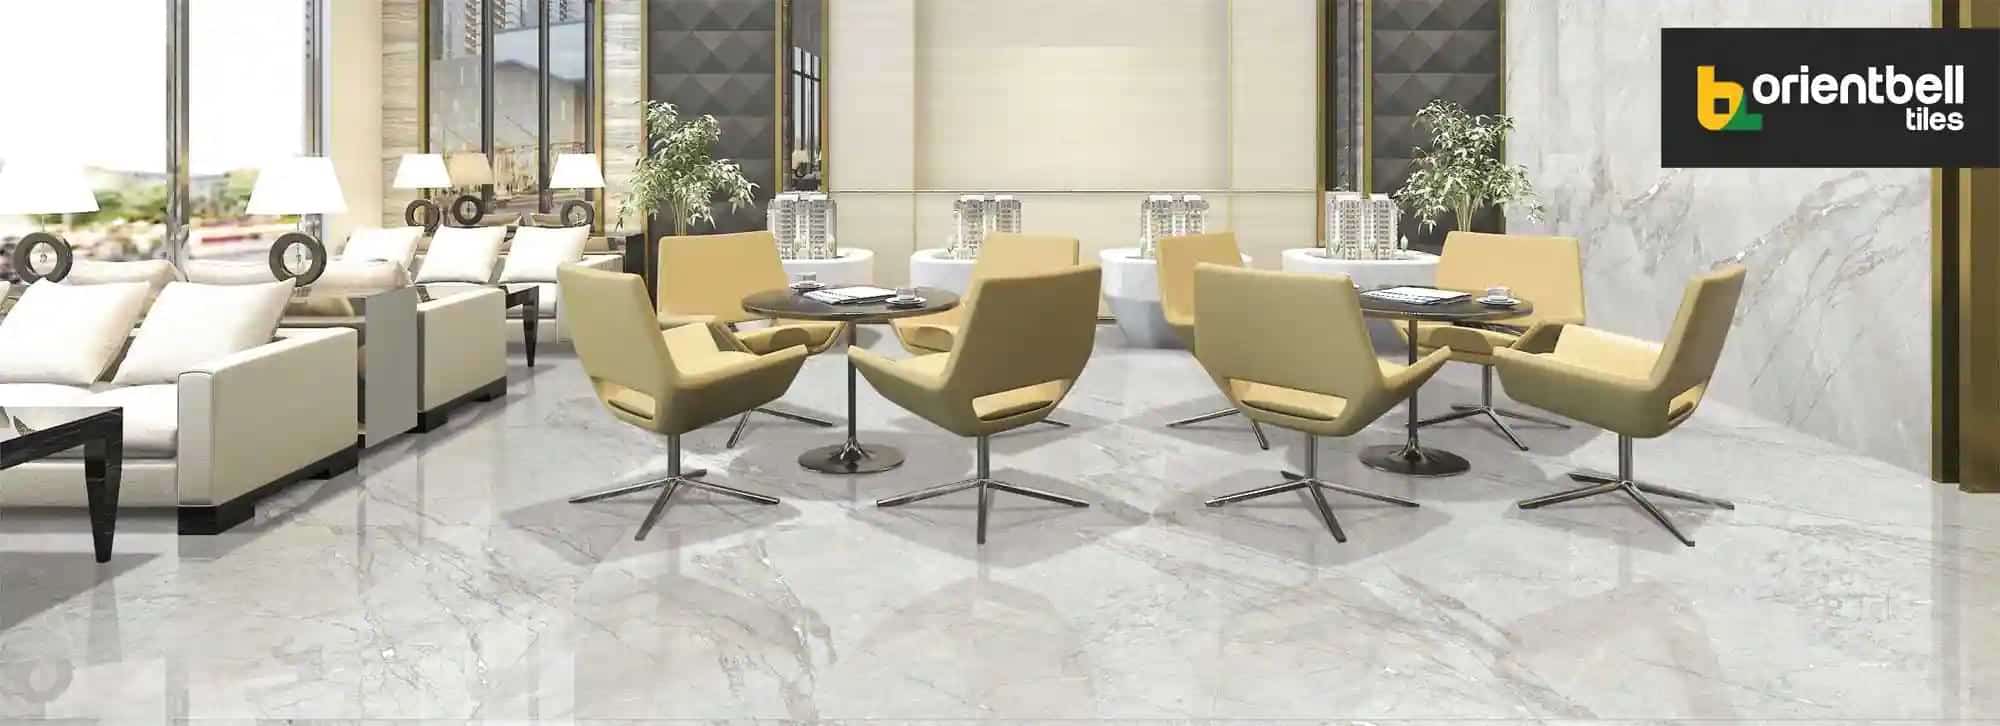 Beautiful office space with floor tiles from the best & top tile companies in India- Orient bell with logo